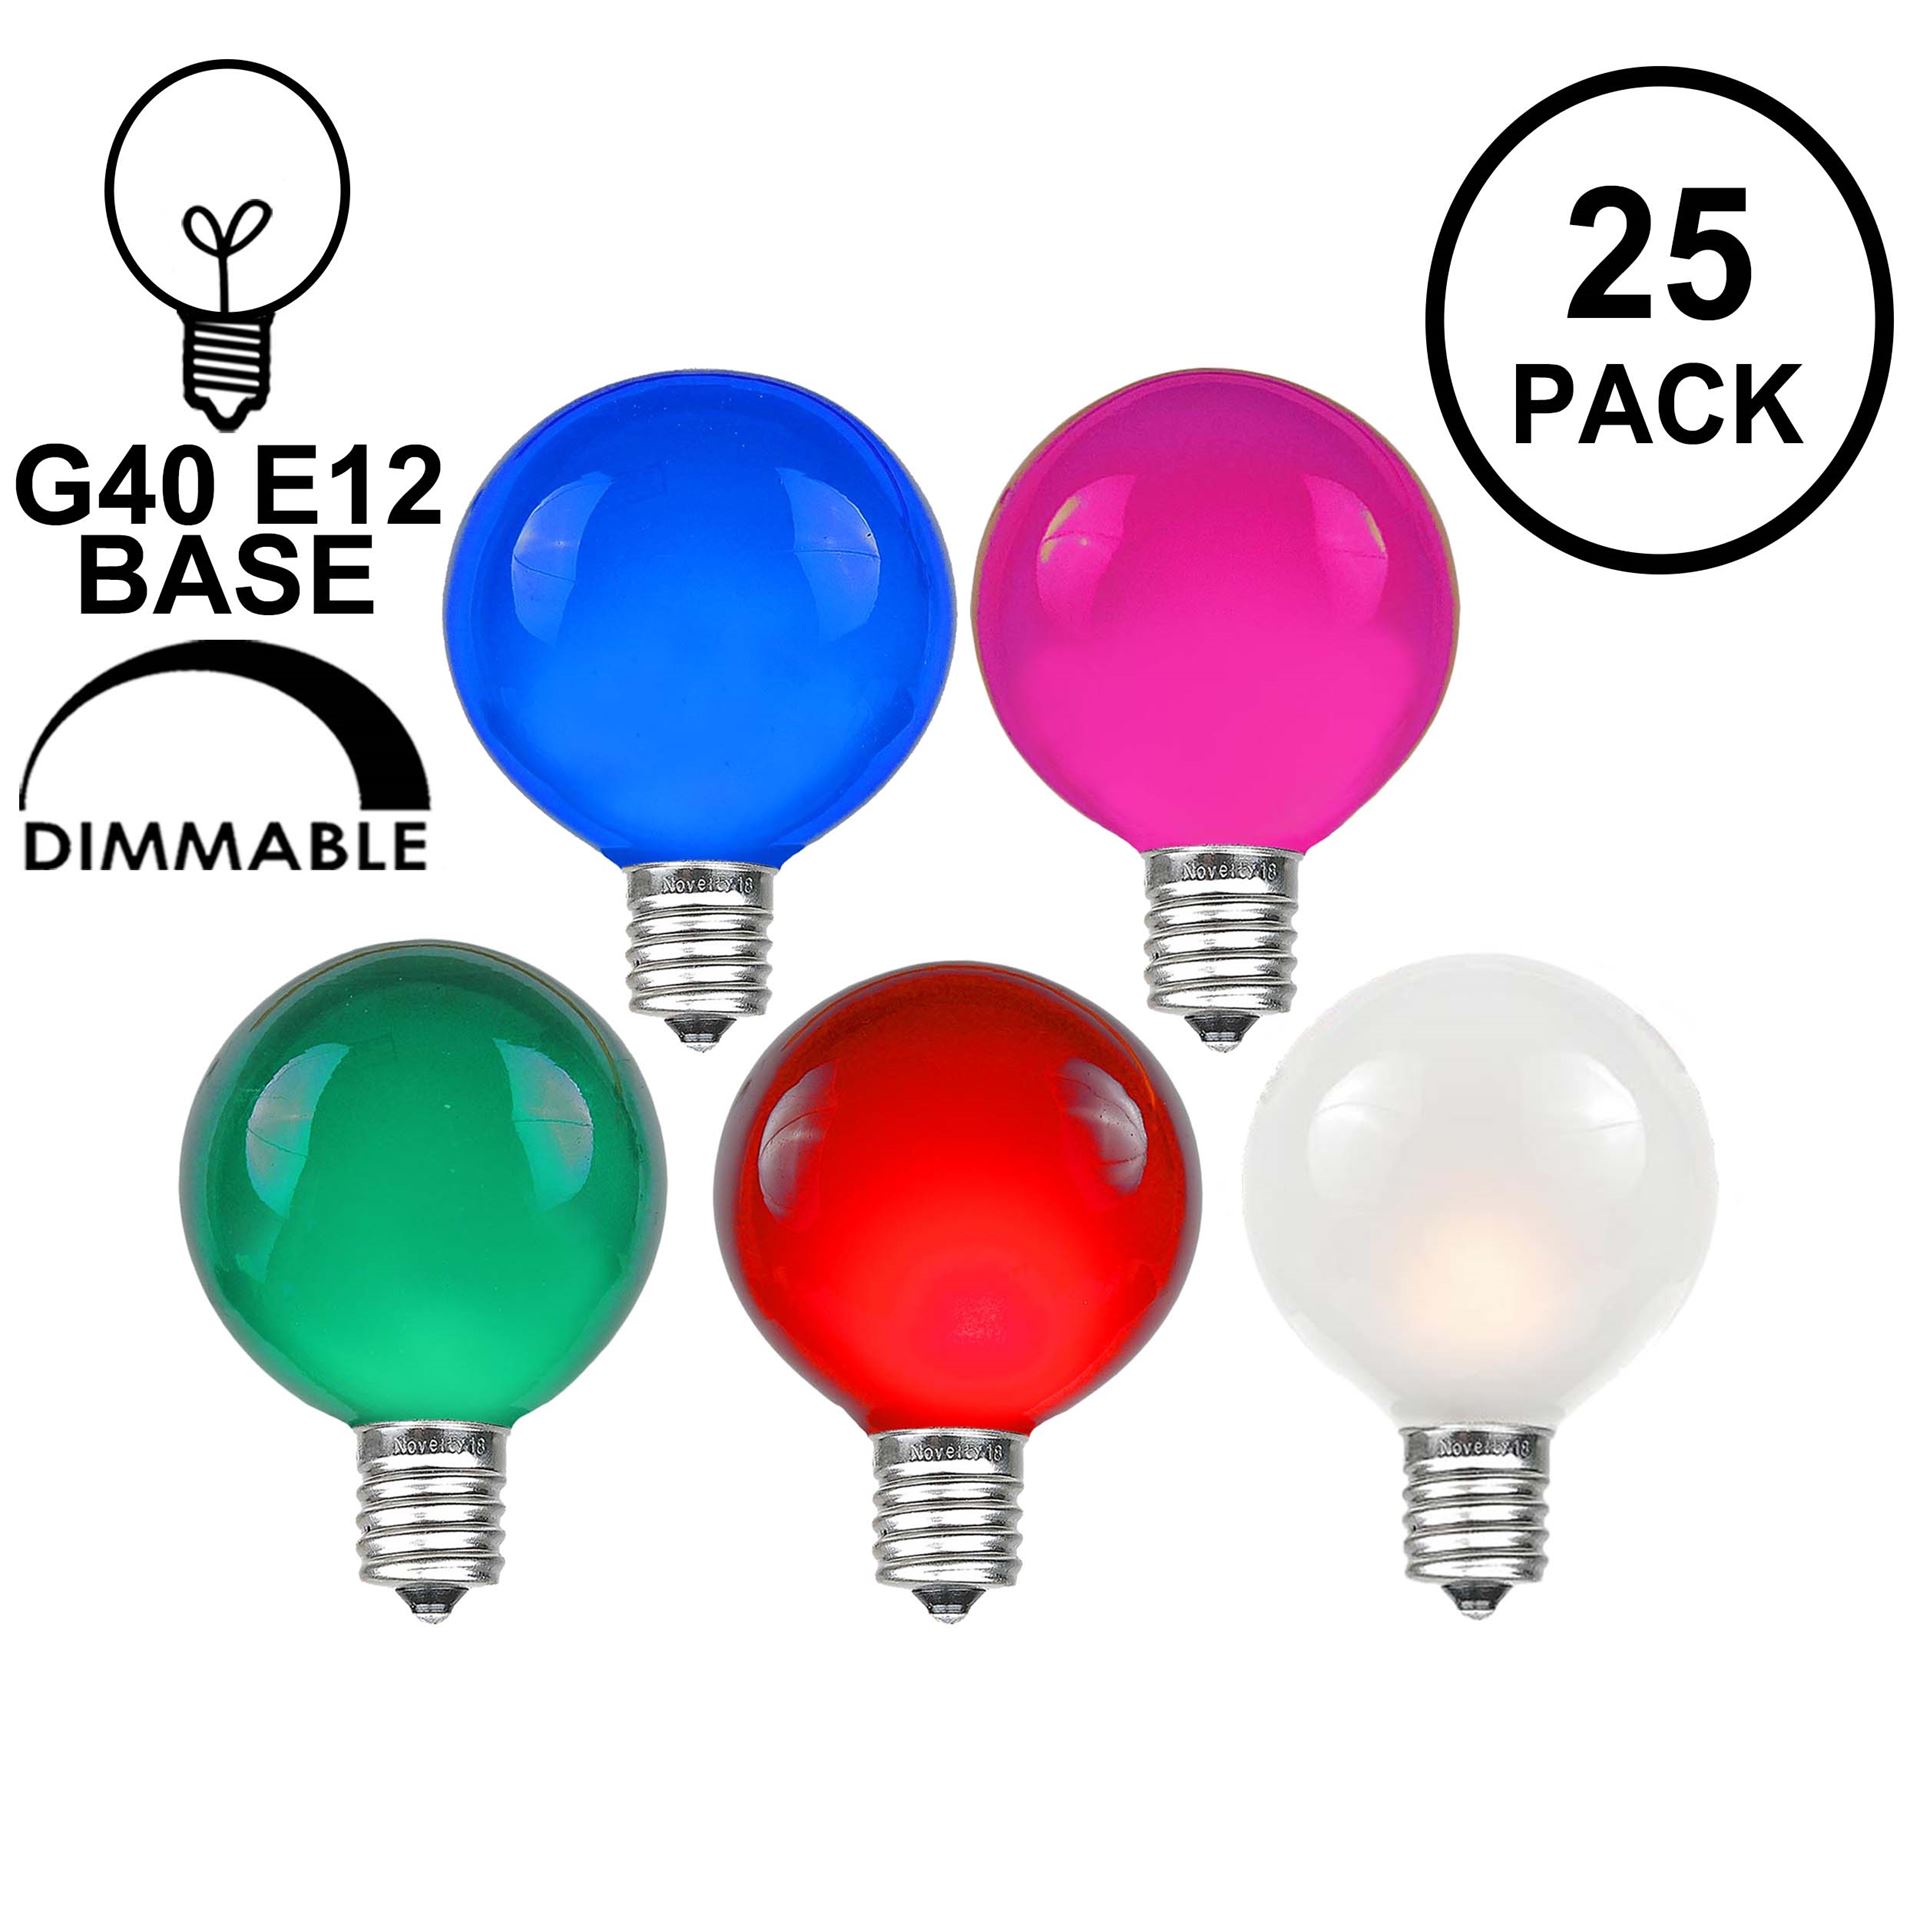 UL Listed Globe Bulbs for Indoor Outdoor Commercial Festival Use 5Watt Replacement Glass Bulb for G40 Strand 25 Pack Multicolor Transparent G40 Globe Bulbs with E12/C7 Screw Base